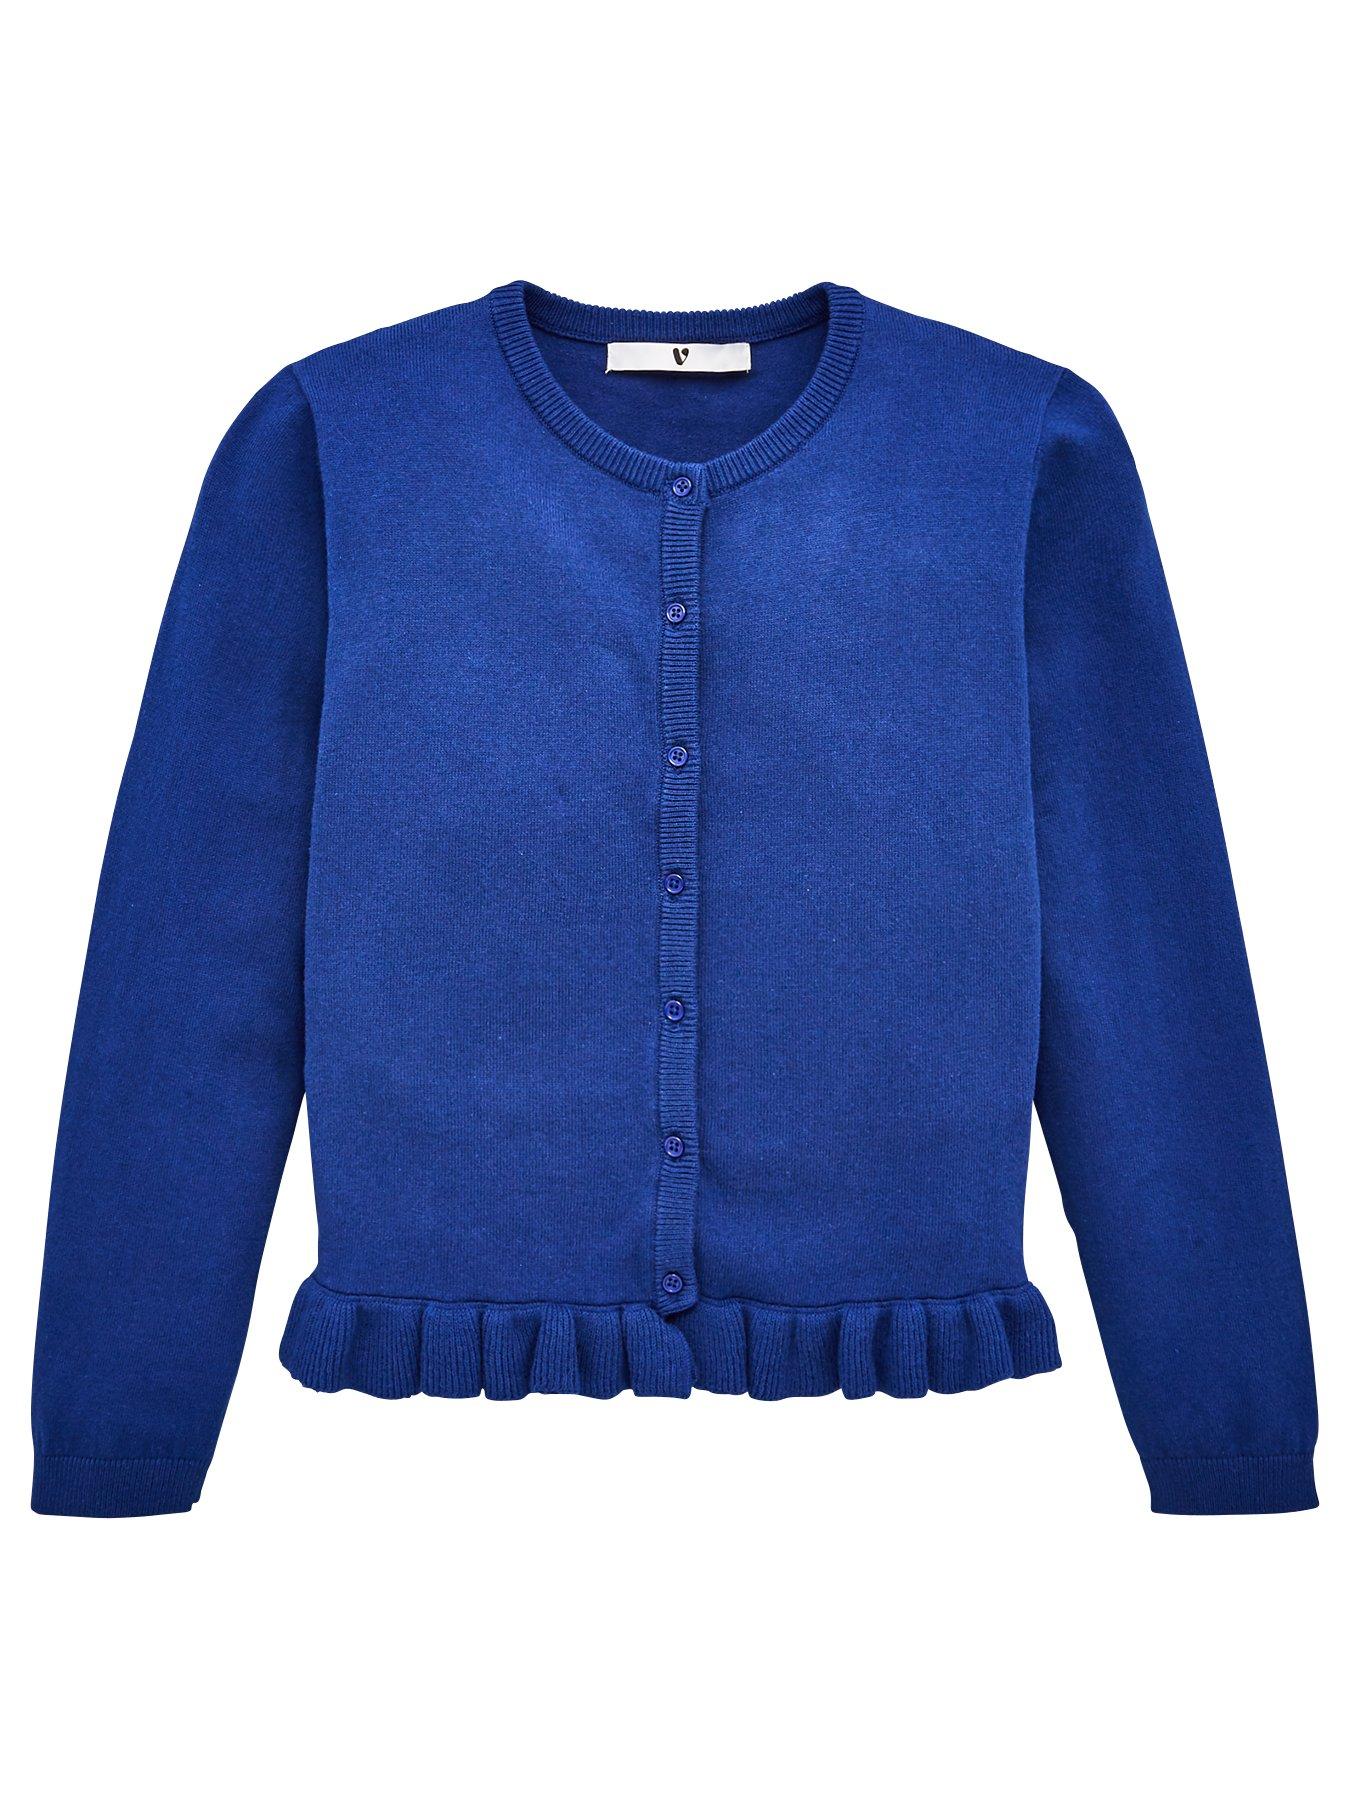 baby girl jumpers and cardigans